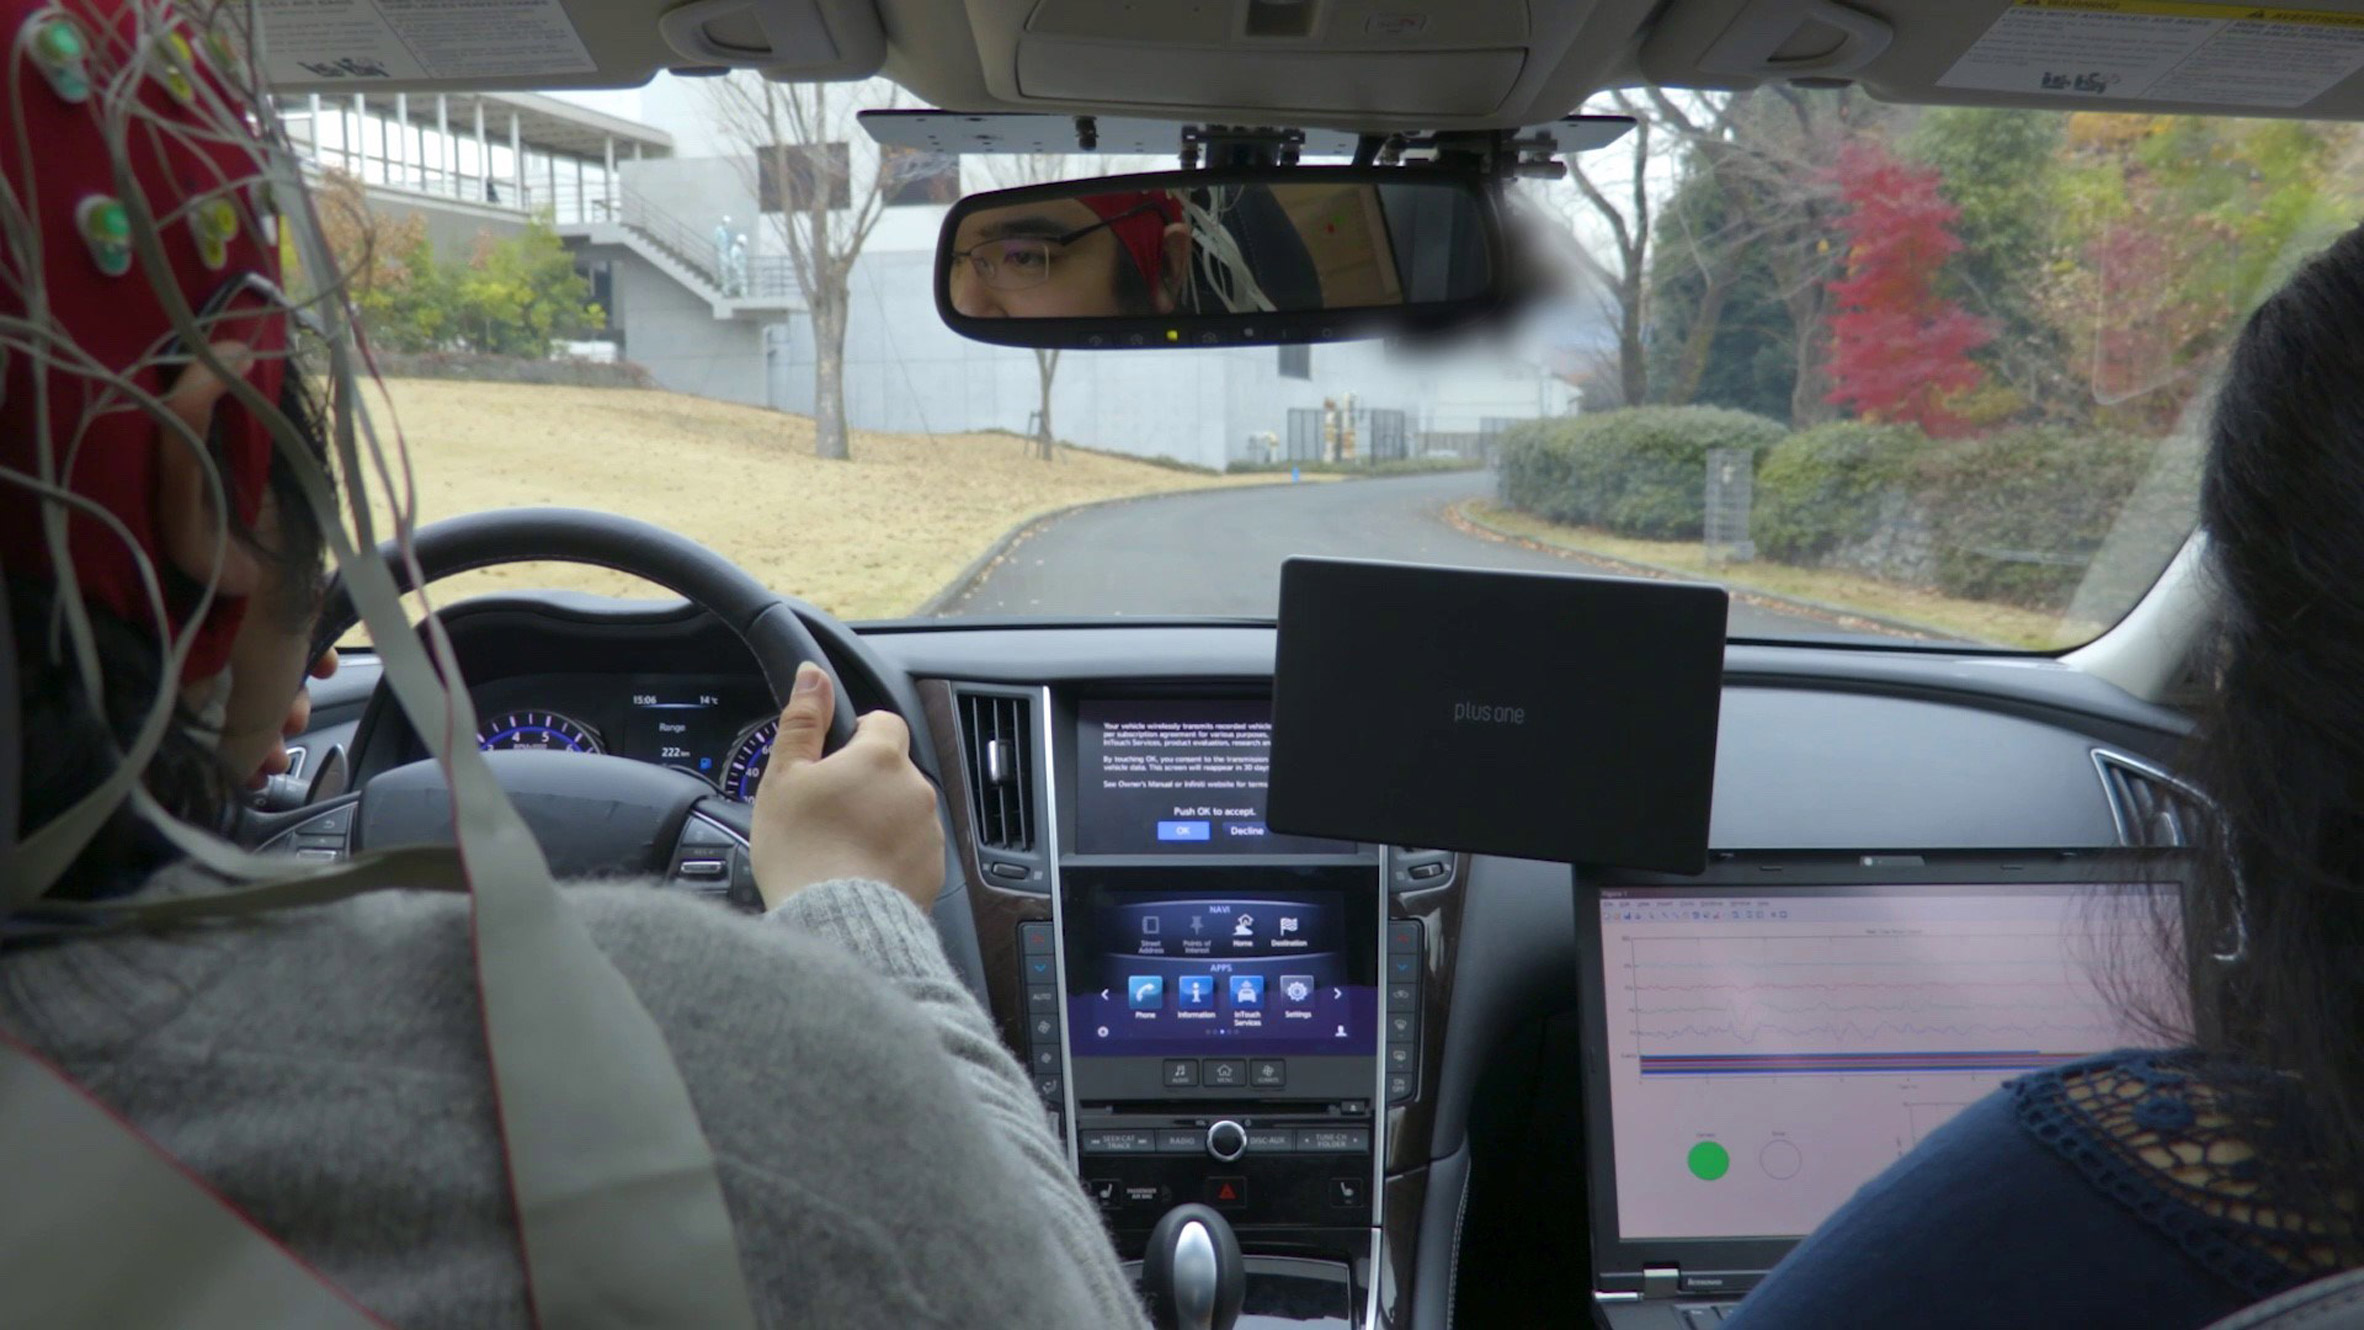 Nissan reveals new brain-to-vehicle technology that will "redefine the future of driving"